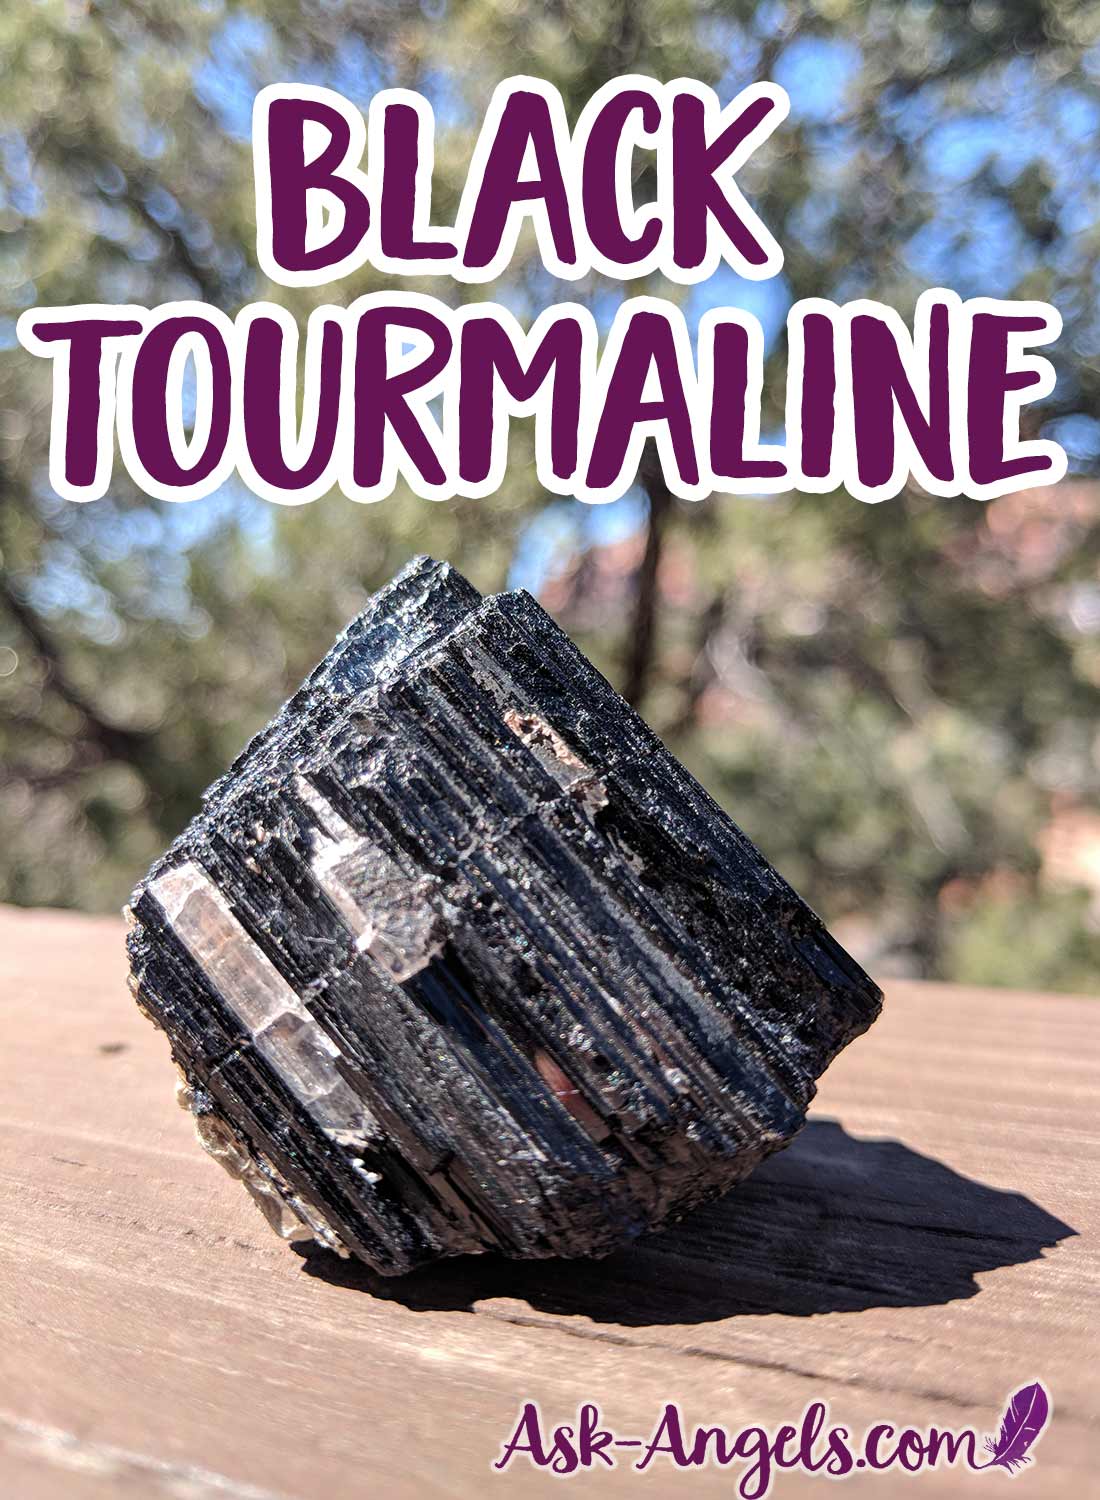 Black Tourmaline - Crystals for Protection